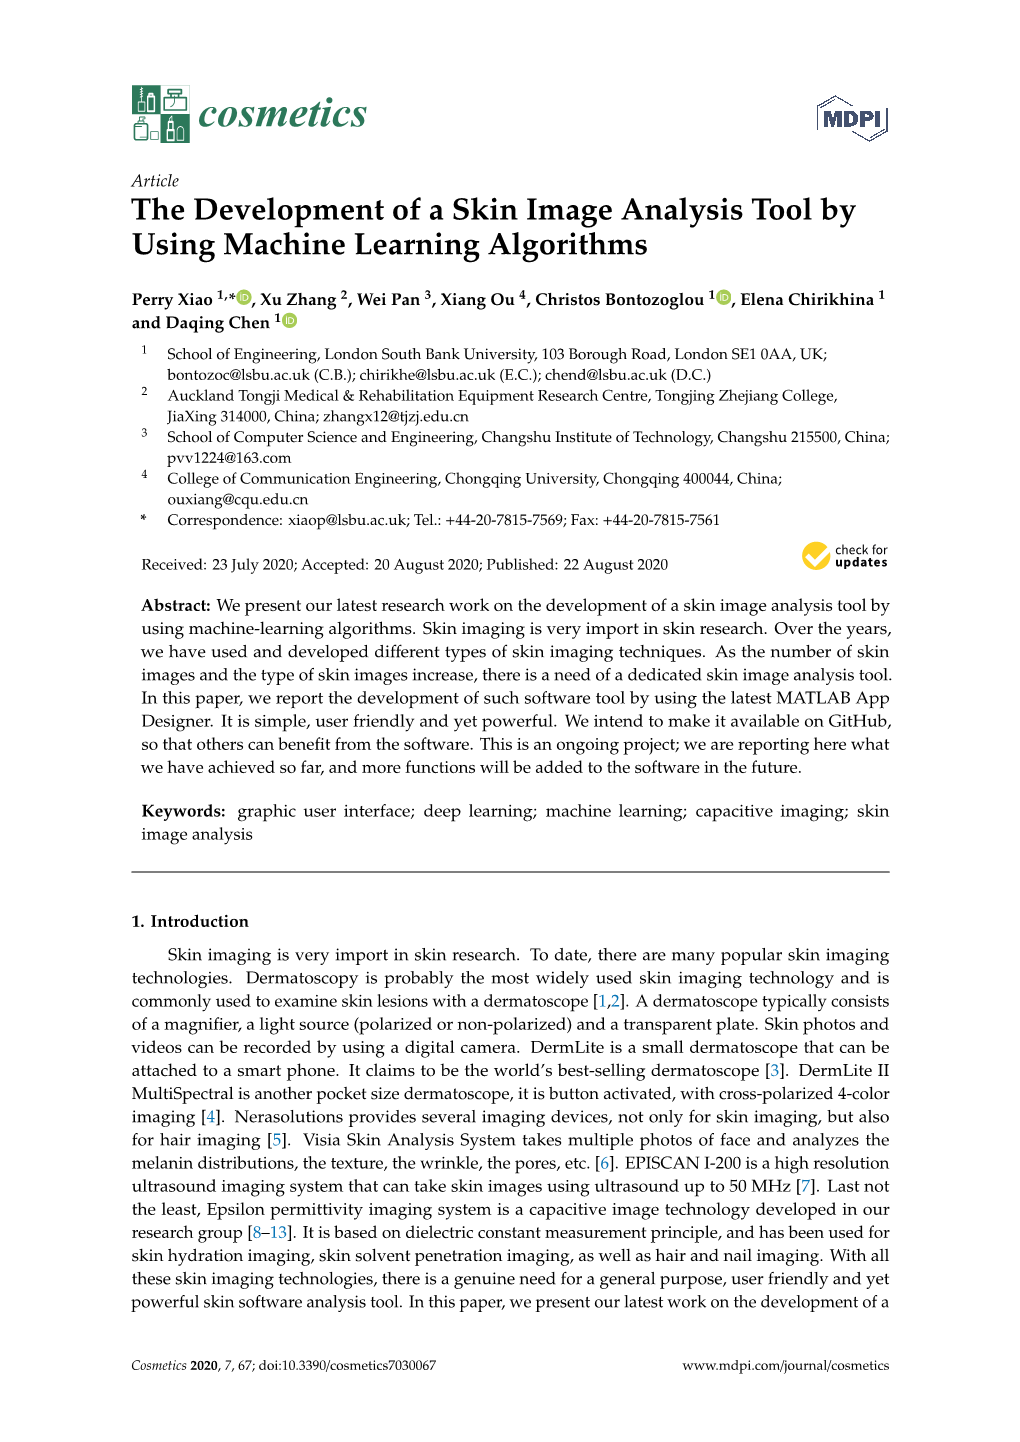 The Development of a Skin Image Analysis Tool by Using Machine Learning Algorithms